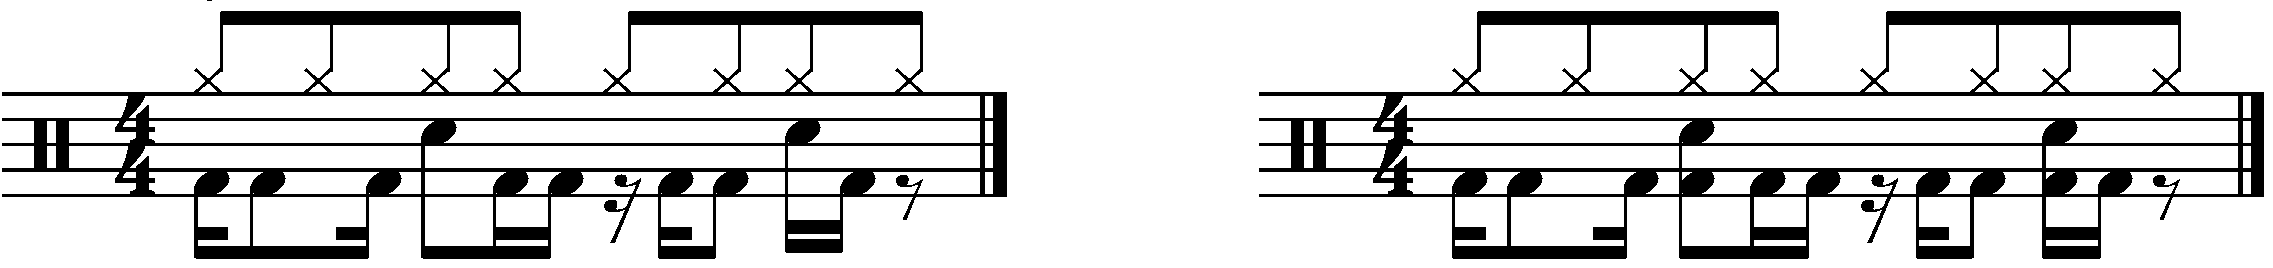 The rhythm applied to a common time groove